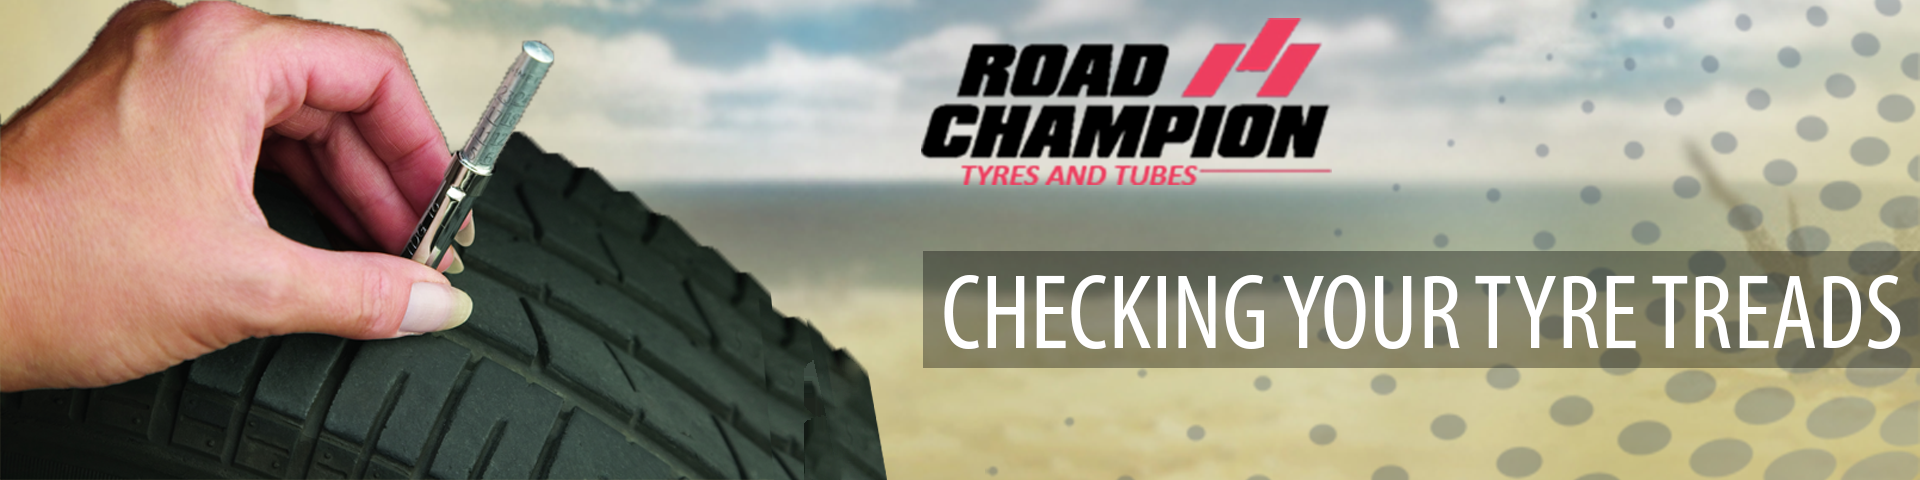 CHECKING-YOUR-TYRE-TREADS